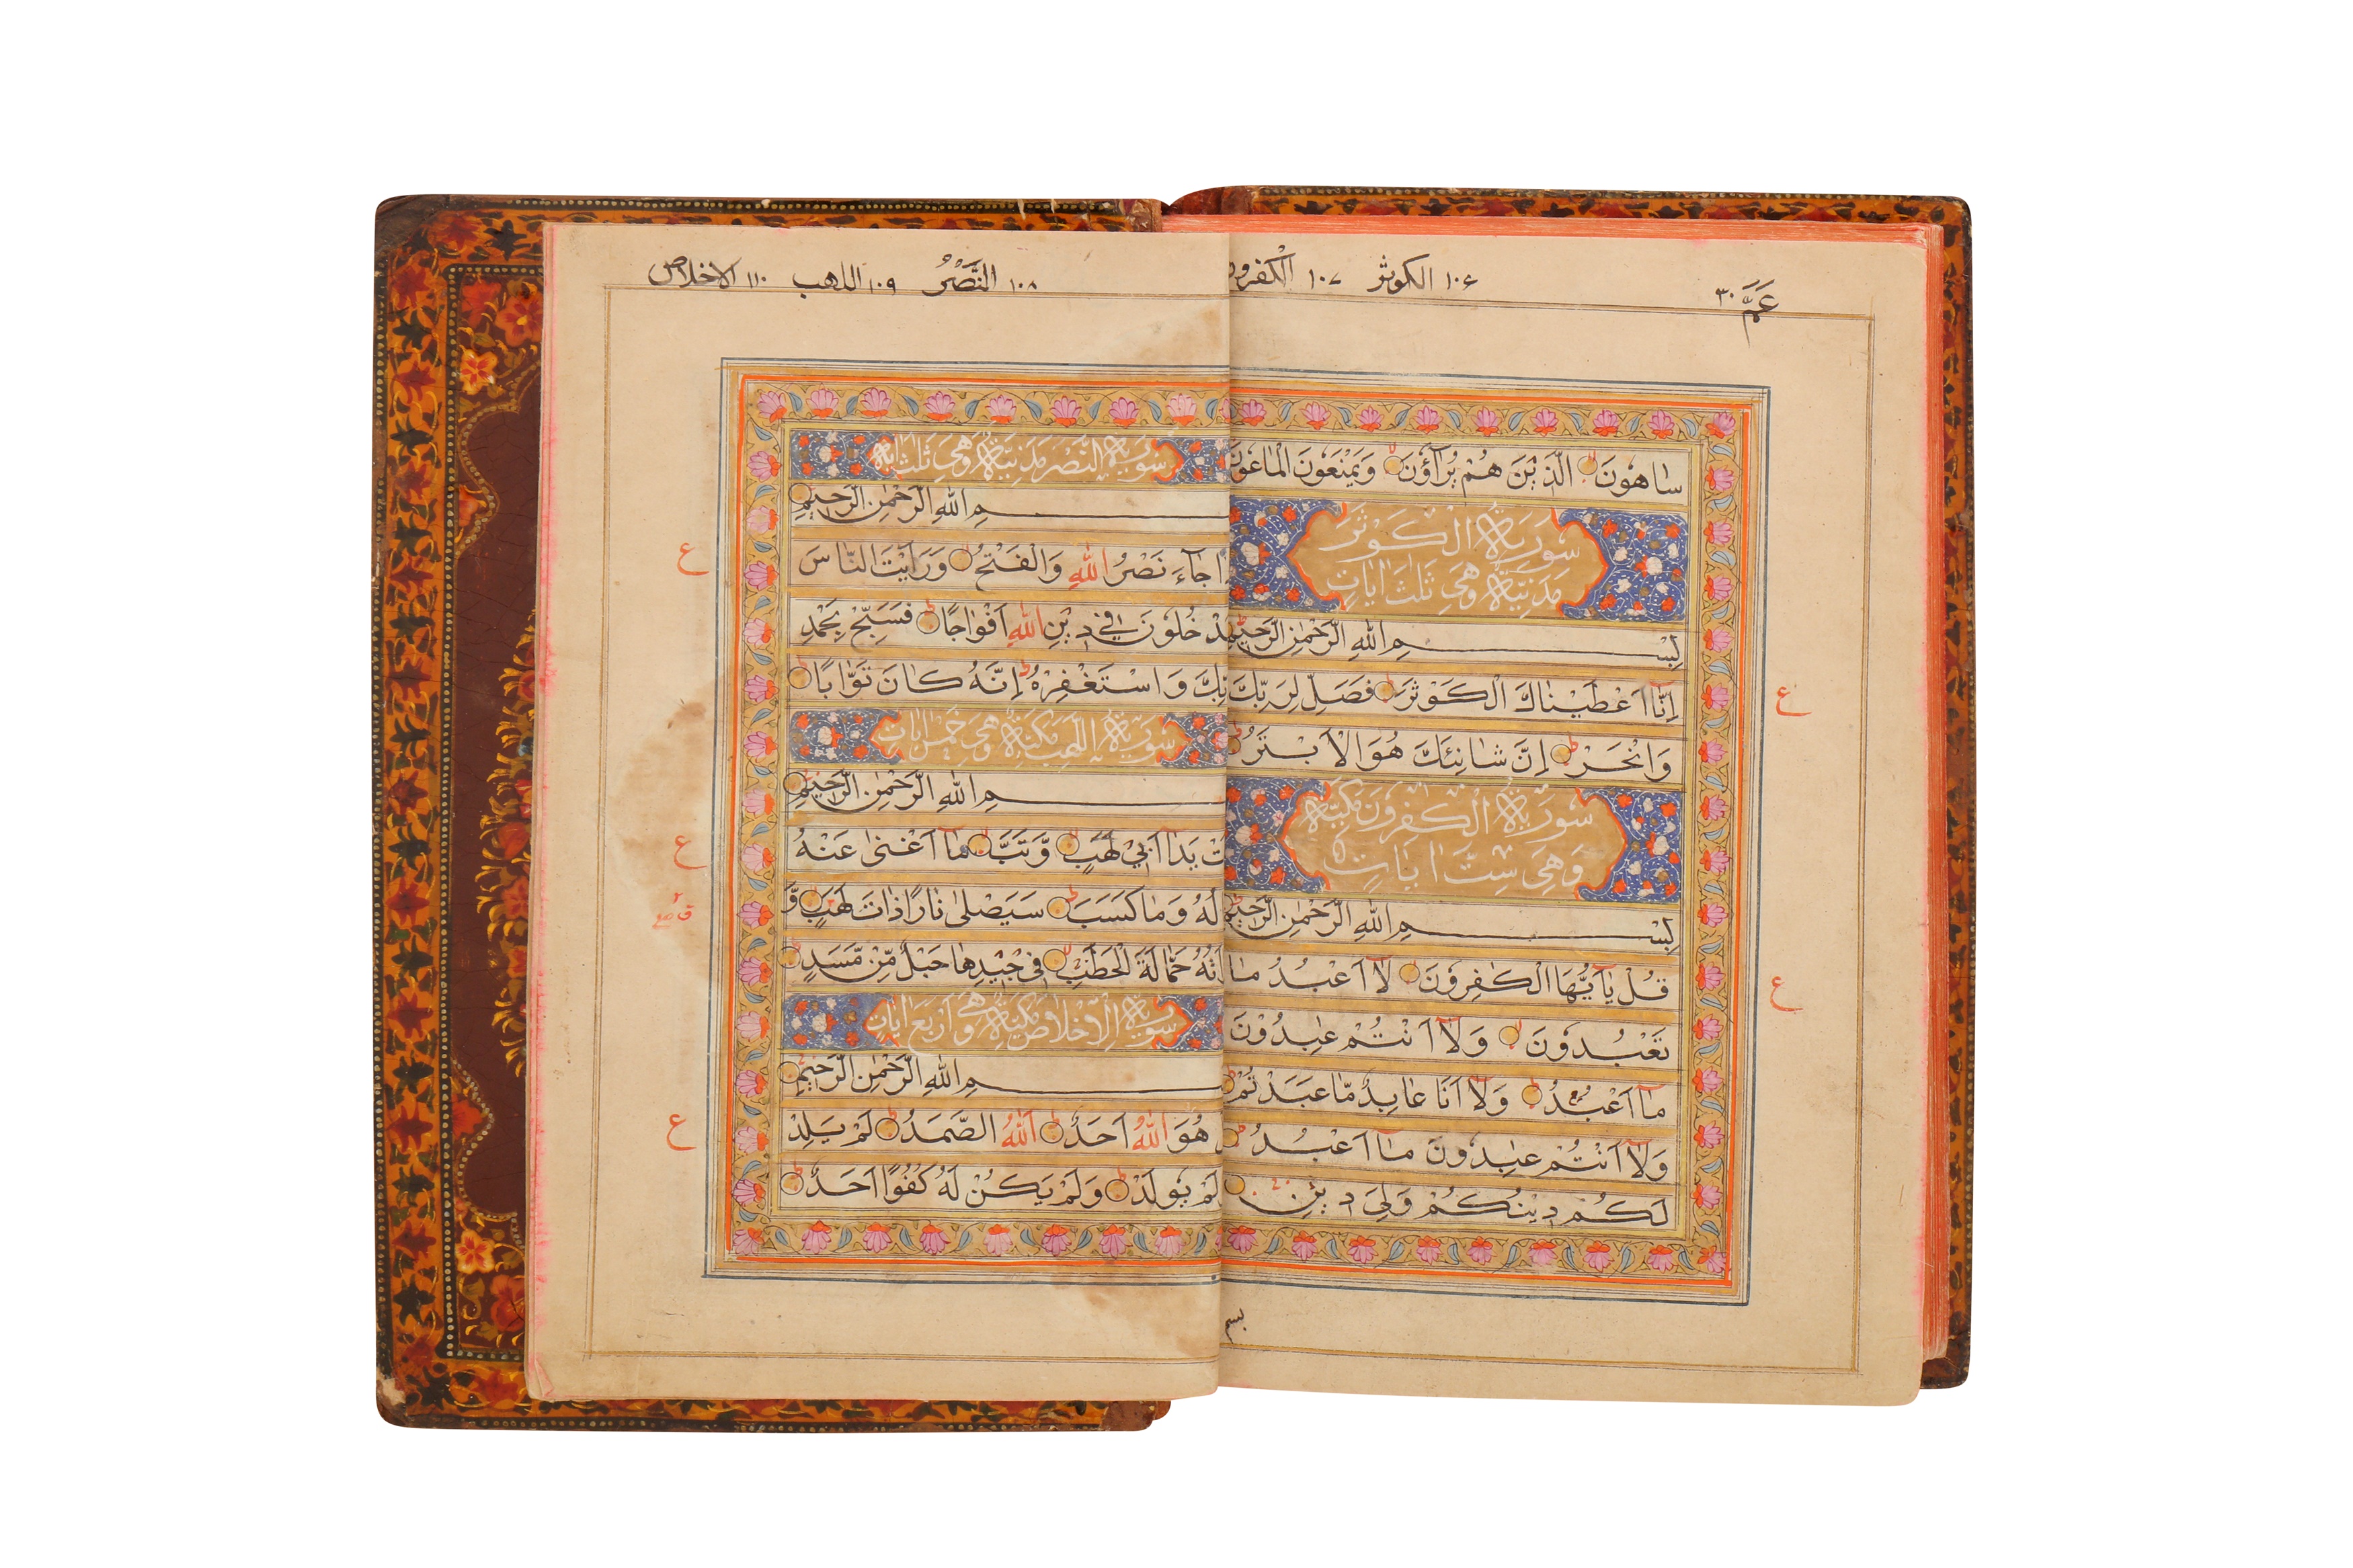 AN EXCEPTIONAL EARLY 19TH CENTURY INDIAN ILLUMINATED QUR'AN, DATED 1222AH (1807 AD) - Image 10 of 10